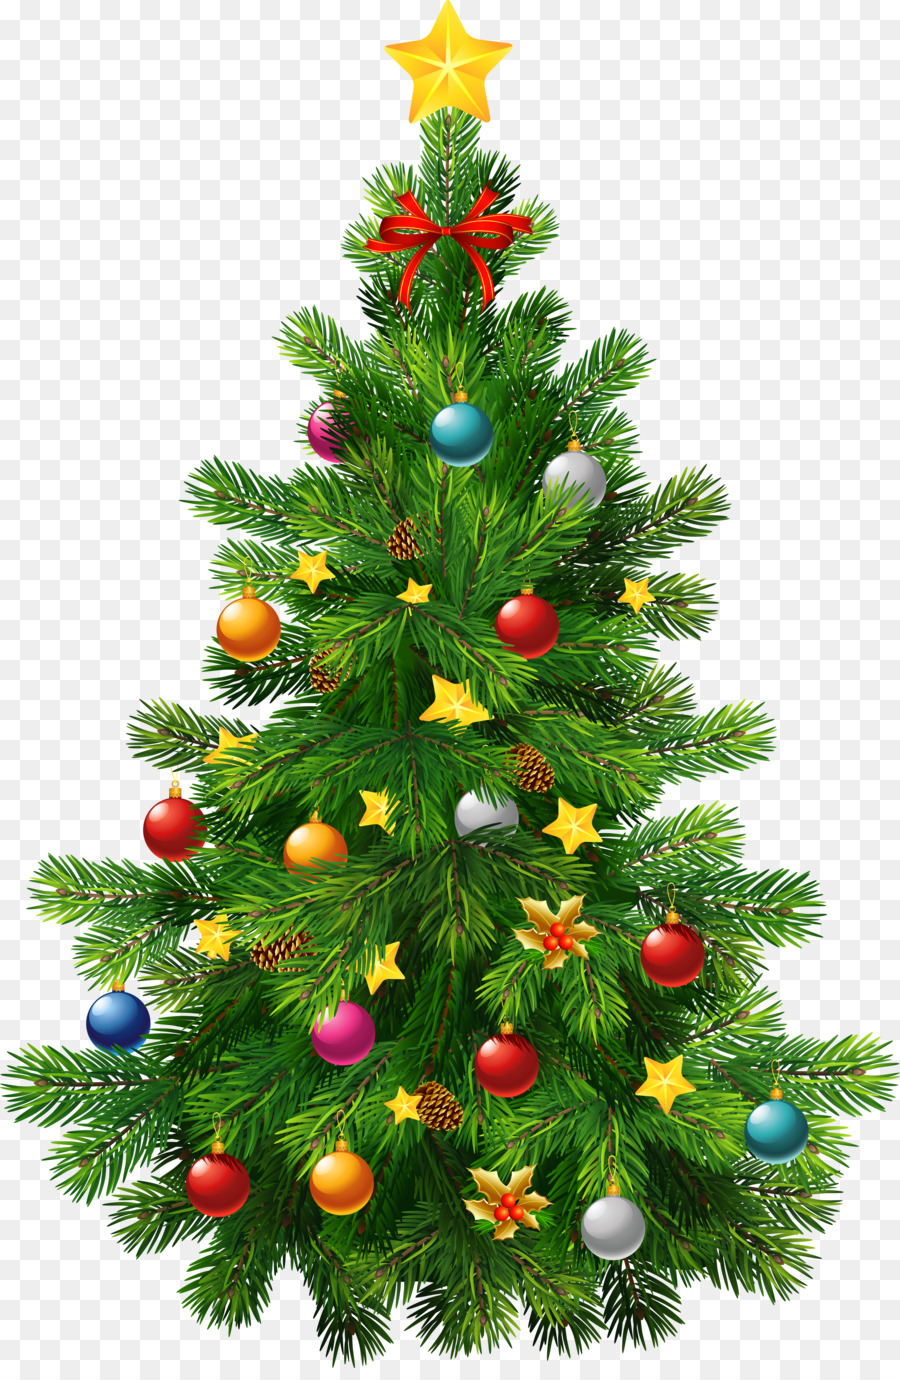 Christmas tree Clip art - Transparent Christmas Cliparts png download - 3900*5929 - Free Transparent Christmas Tree png Download.